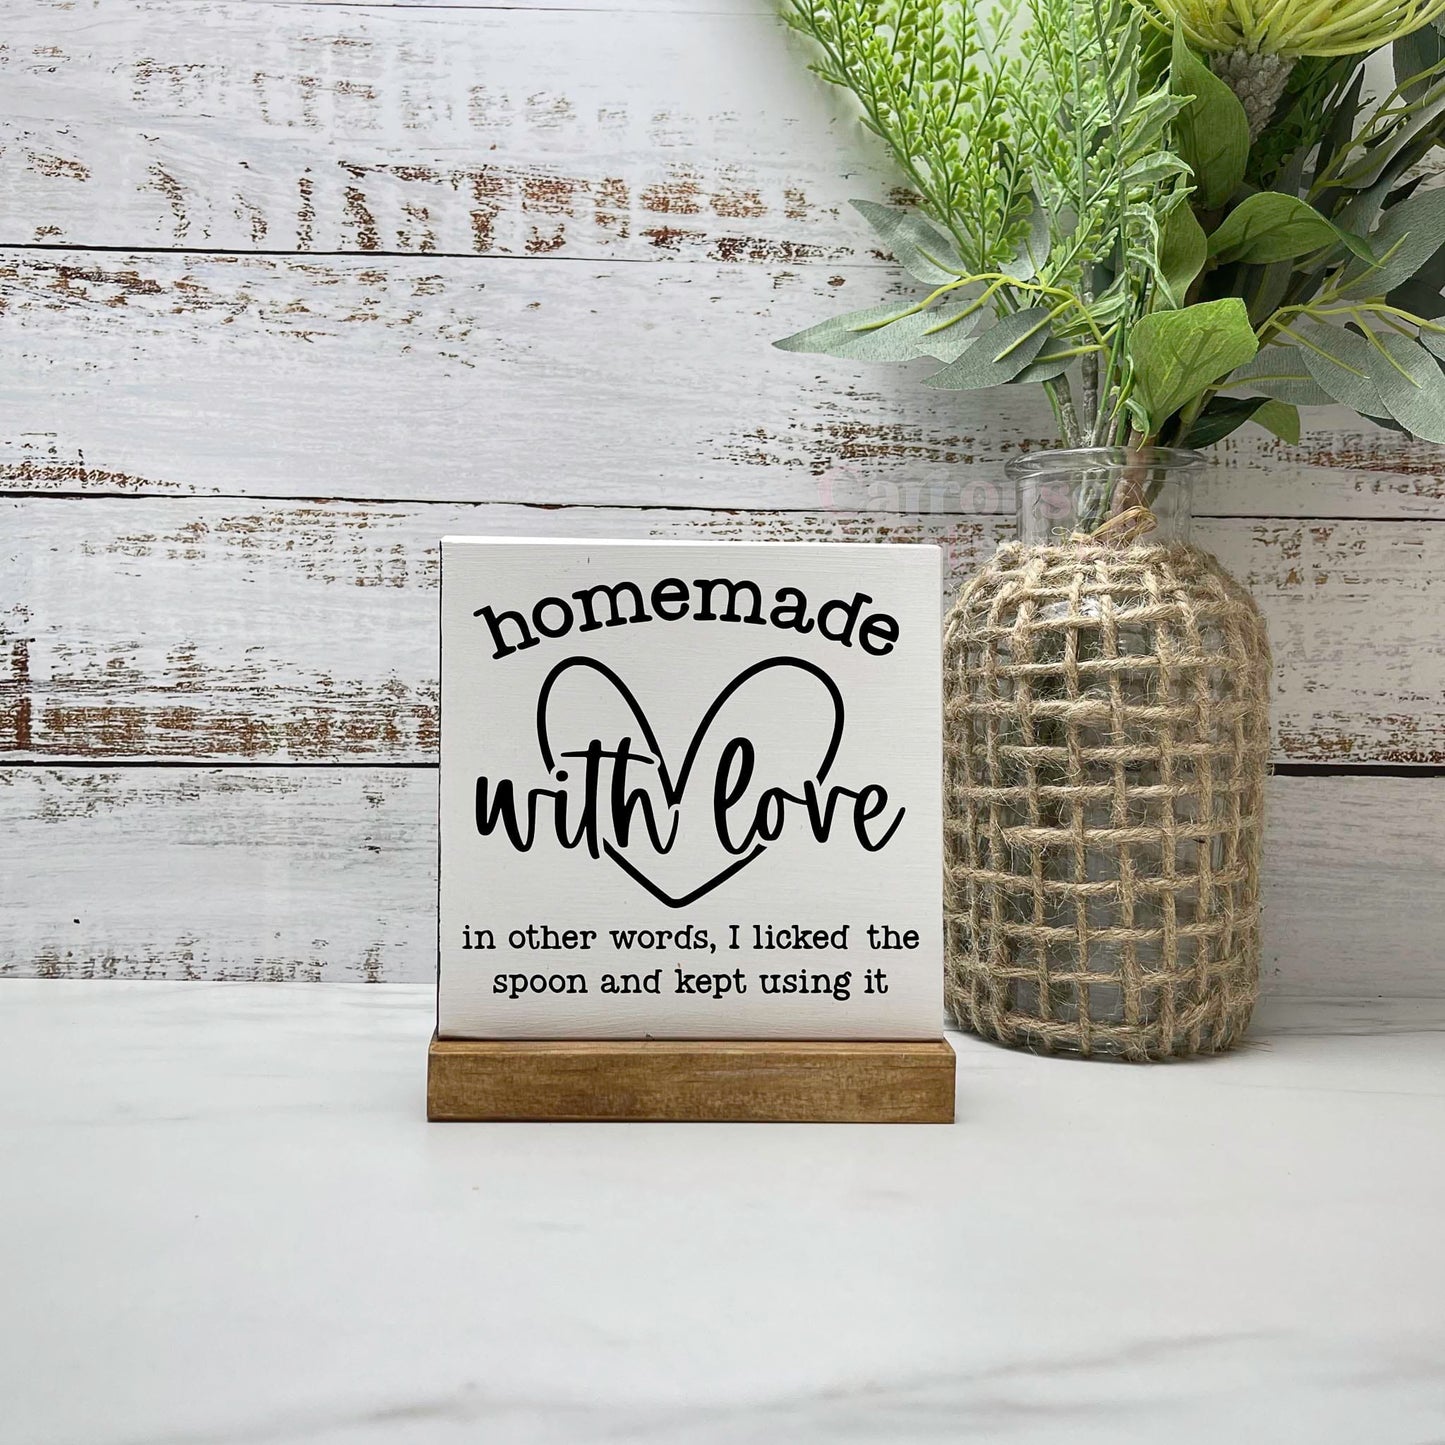 Homemade with love sign, kitchen wood sign, kitchen decor, home decor